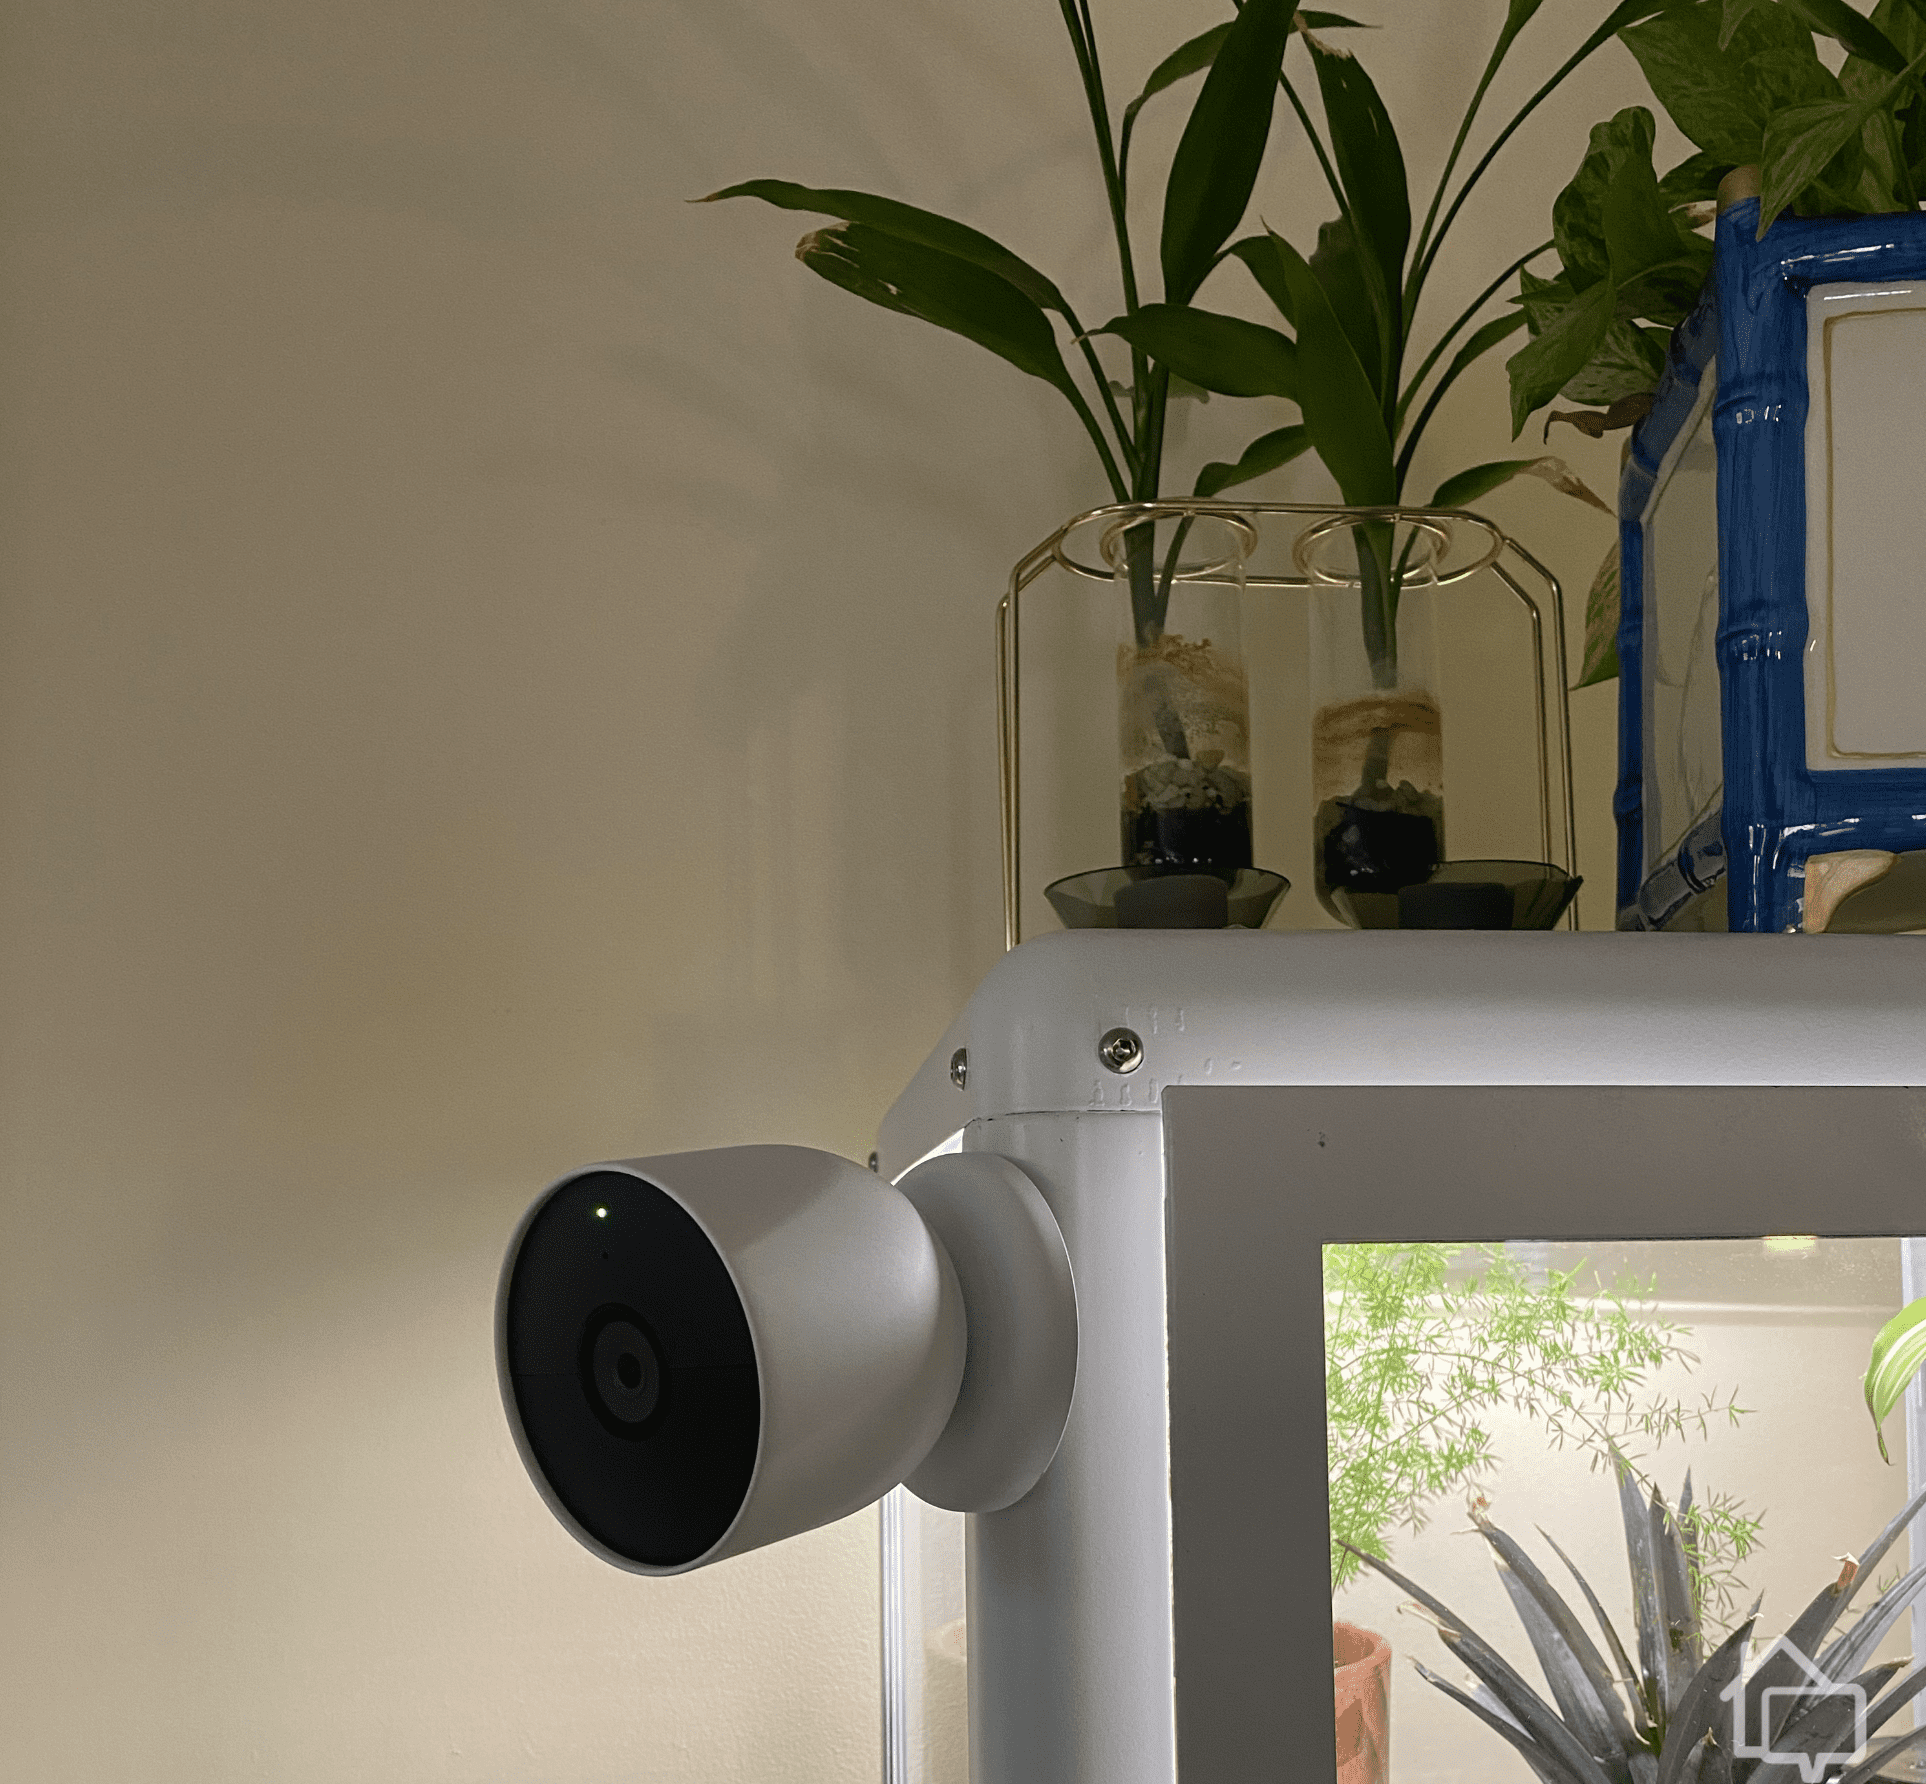 The Nest Cam mounted indoors